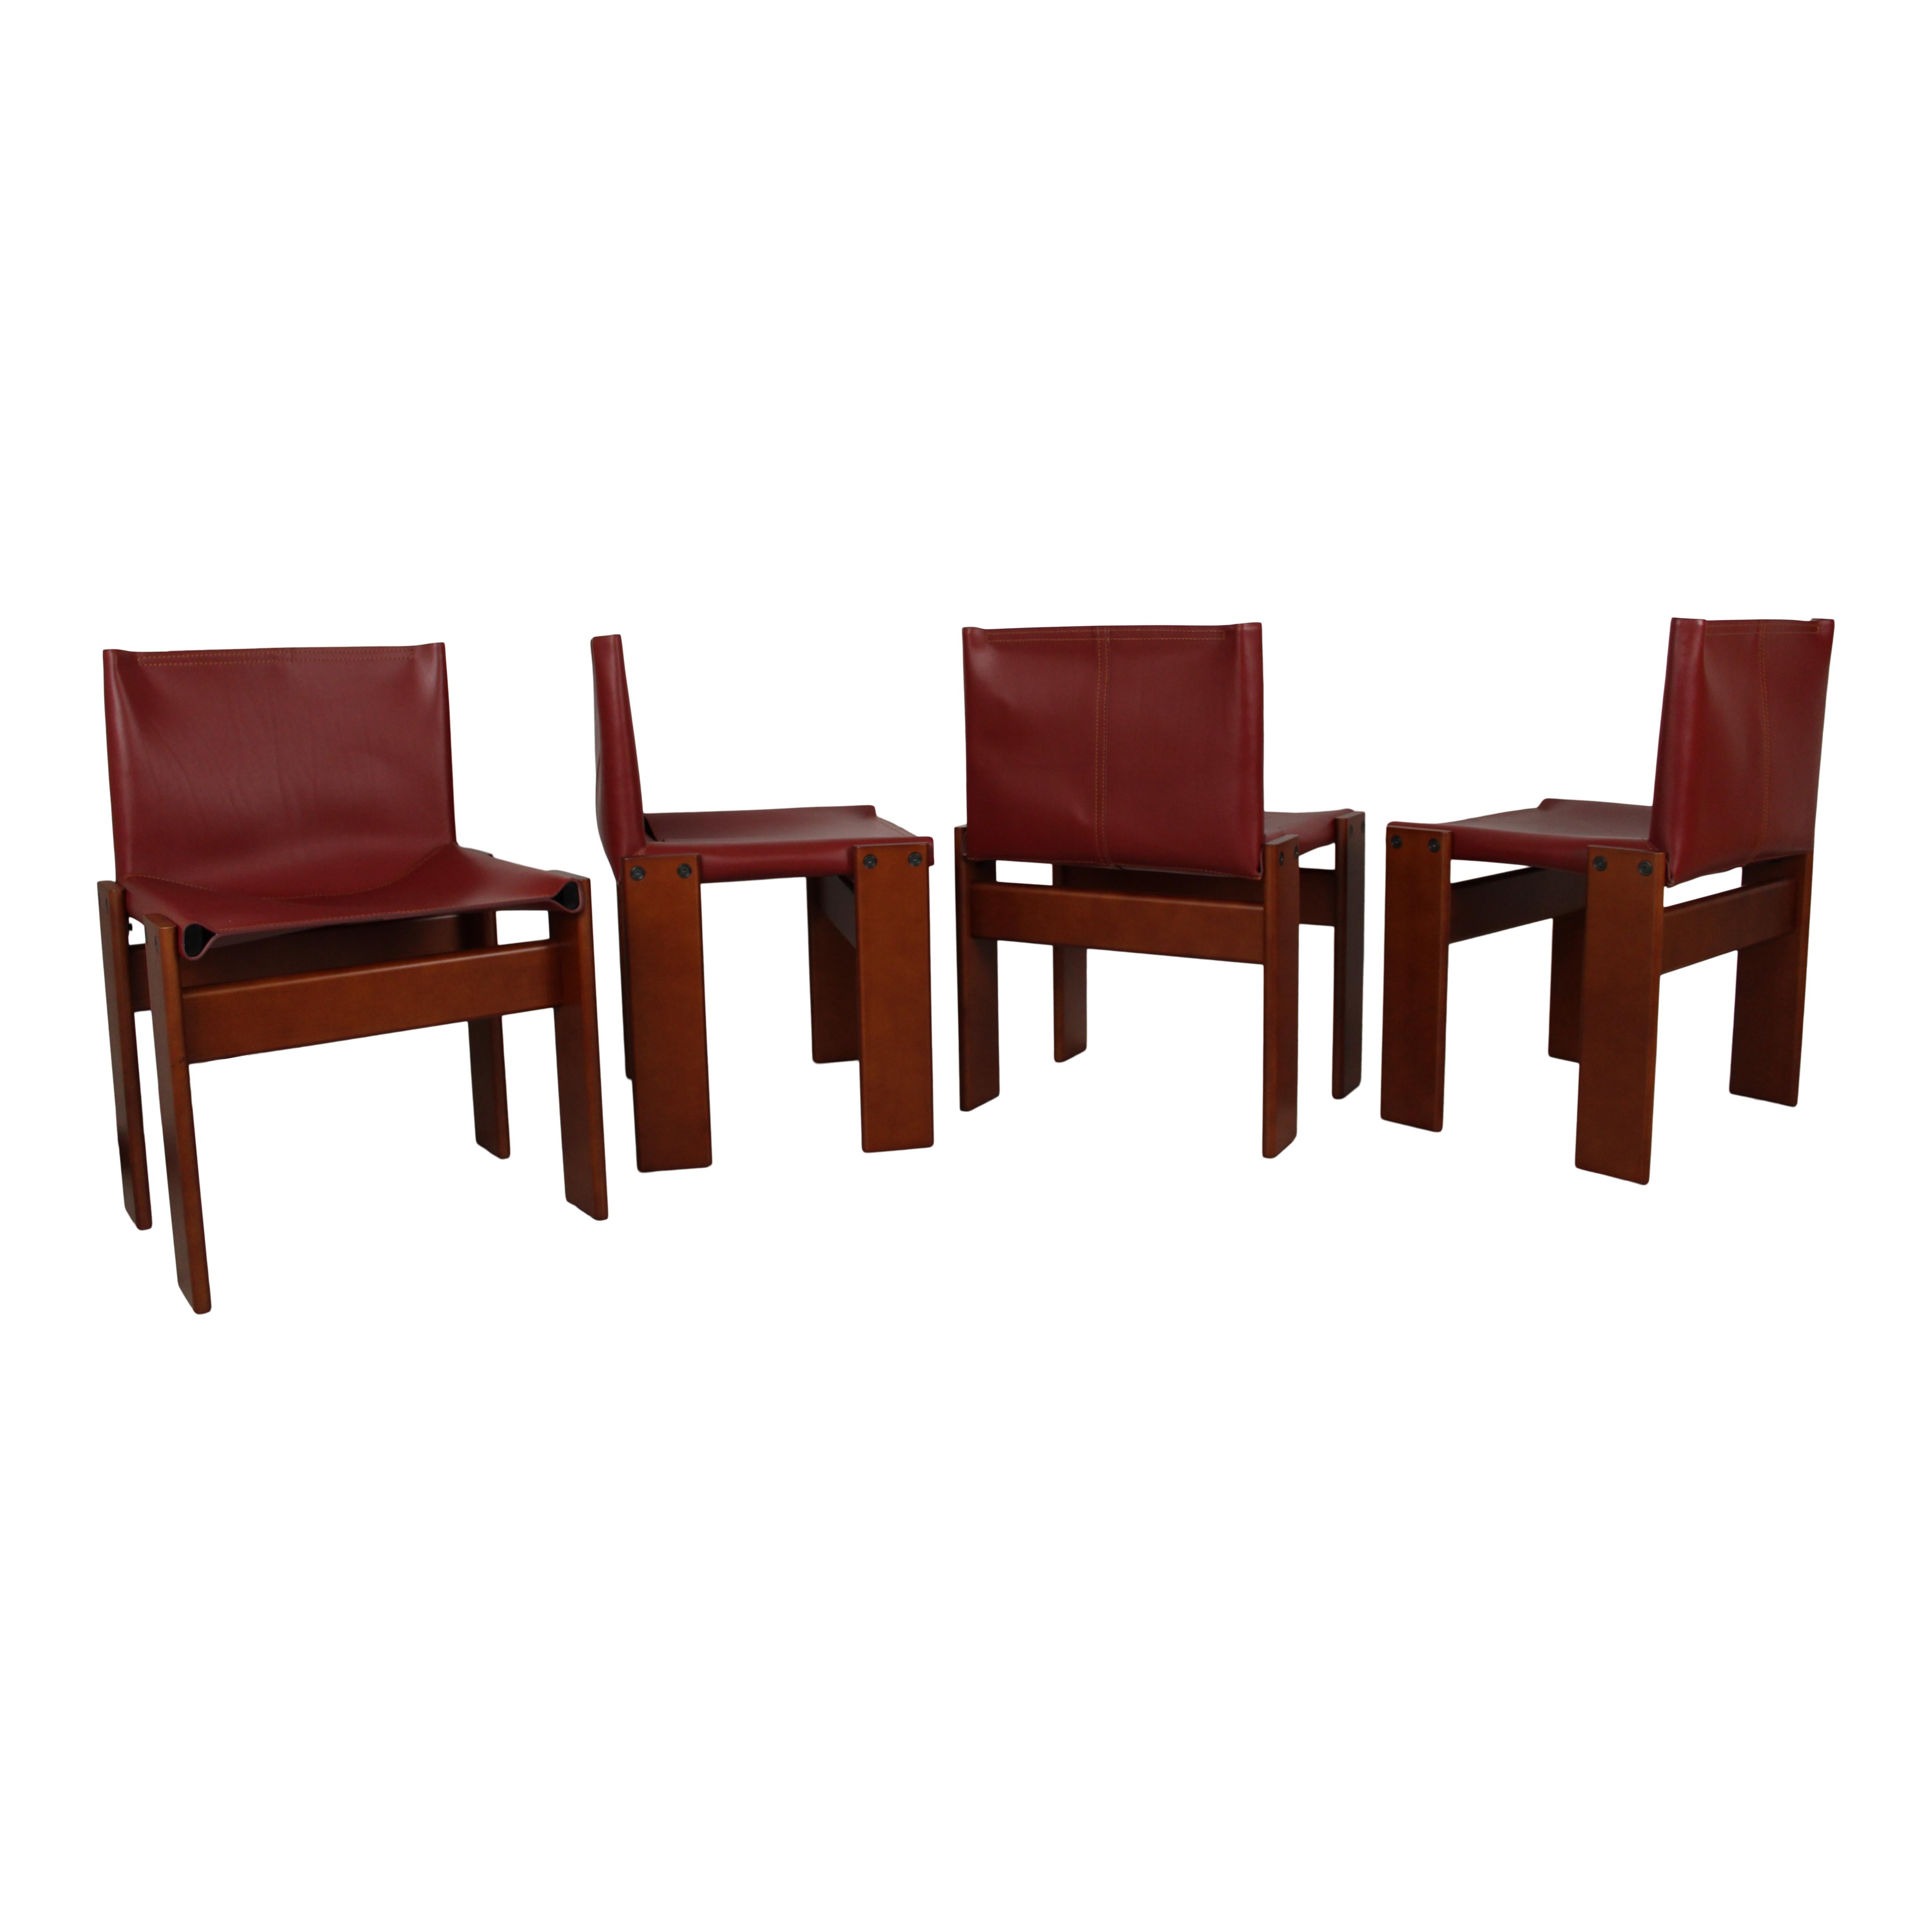 Afra & Tobia Scarpa English Red  Leather Monk Dining Chair for Molteni, Set of 6 For Sale 1